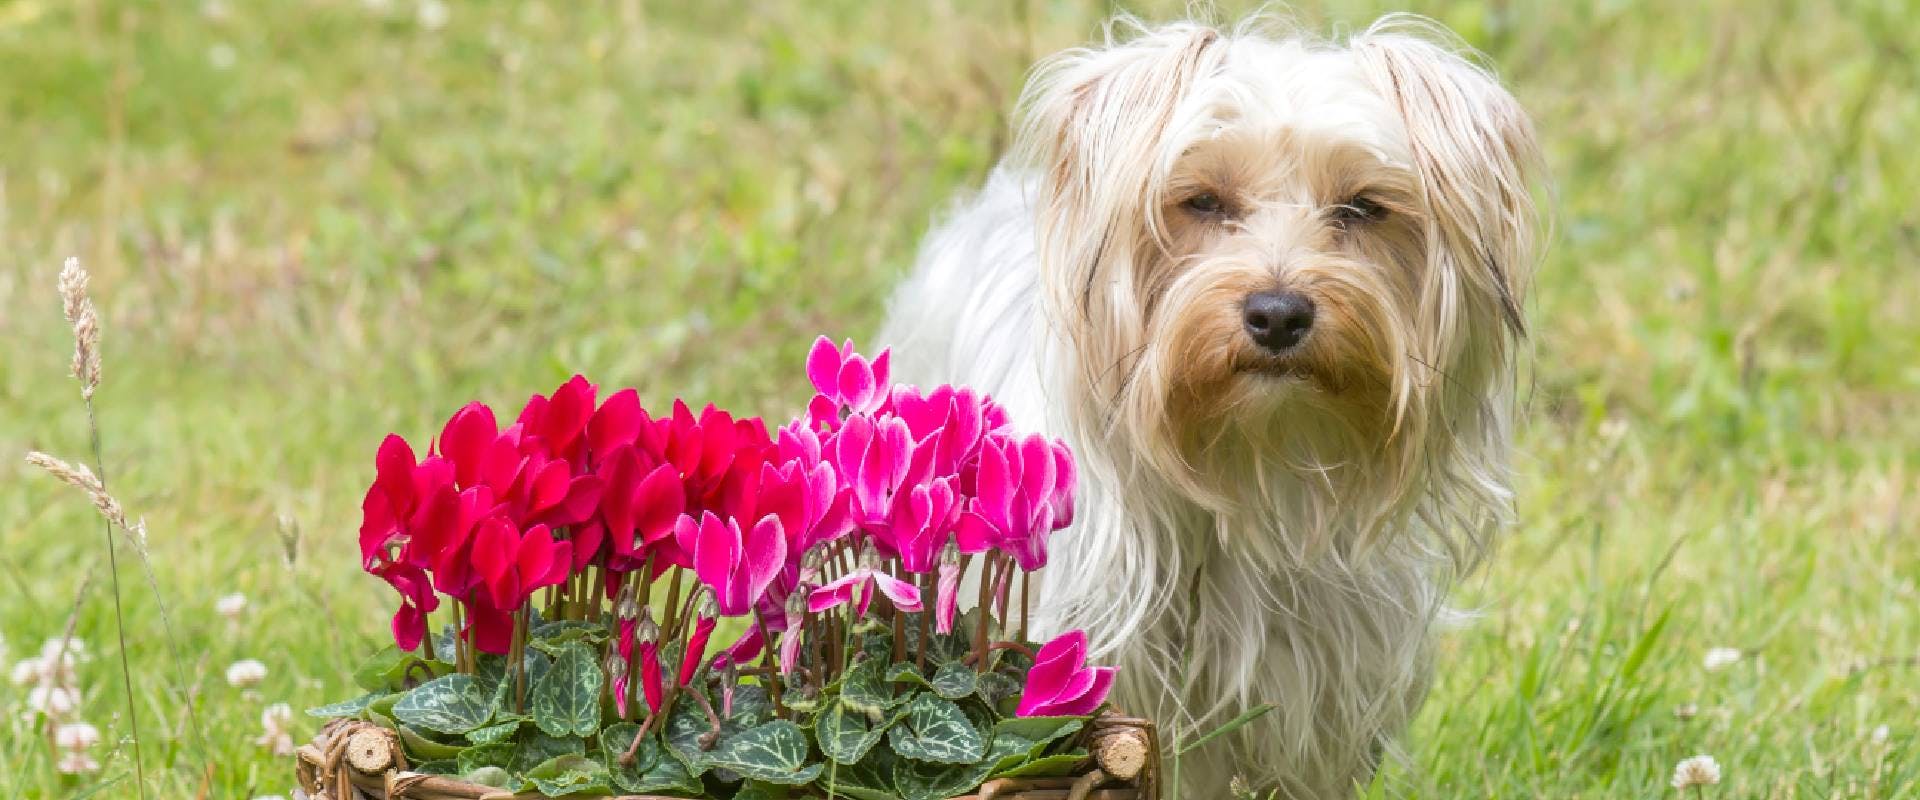 Cyclamen persicum in a basket and Yorkshire Terrier